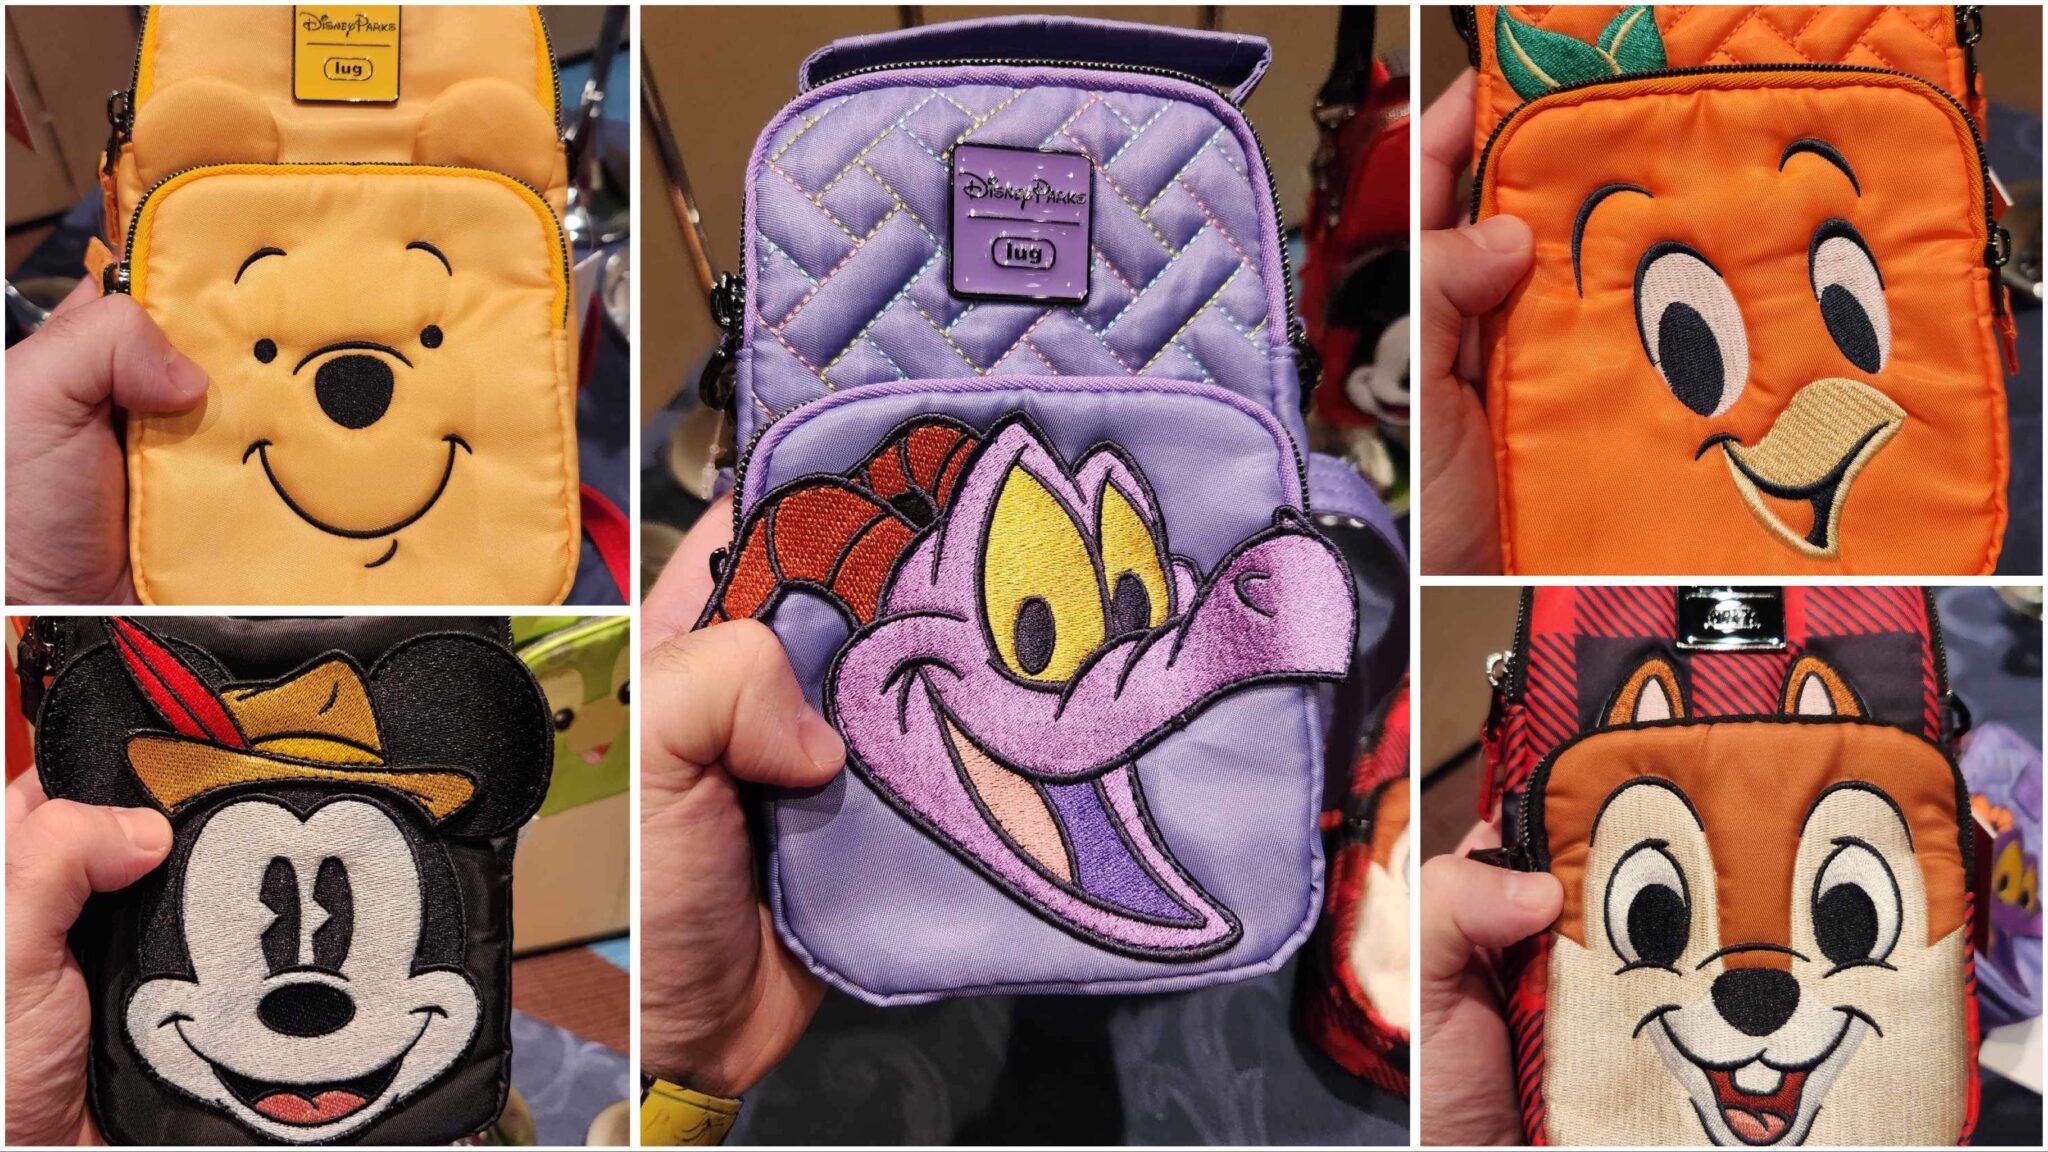 Lug Disney Bags Archives - Chip and Company